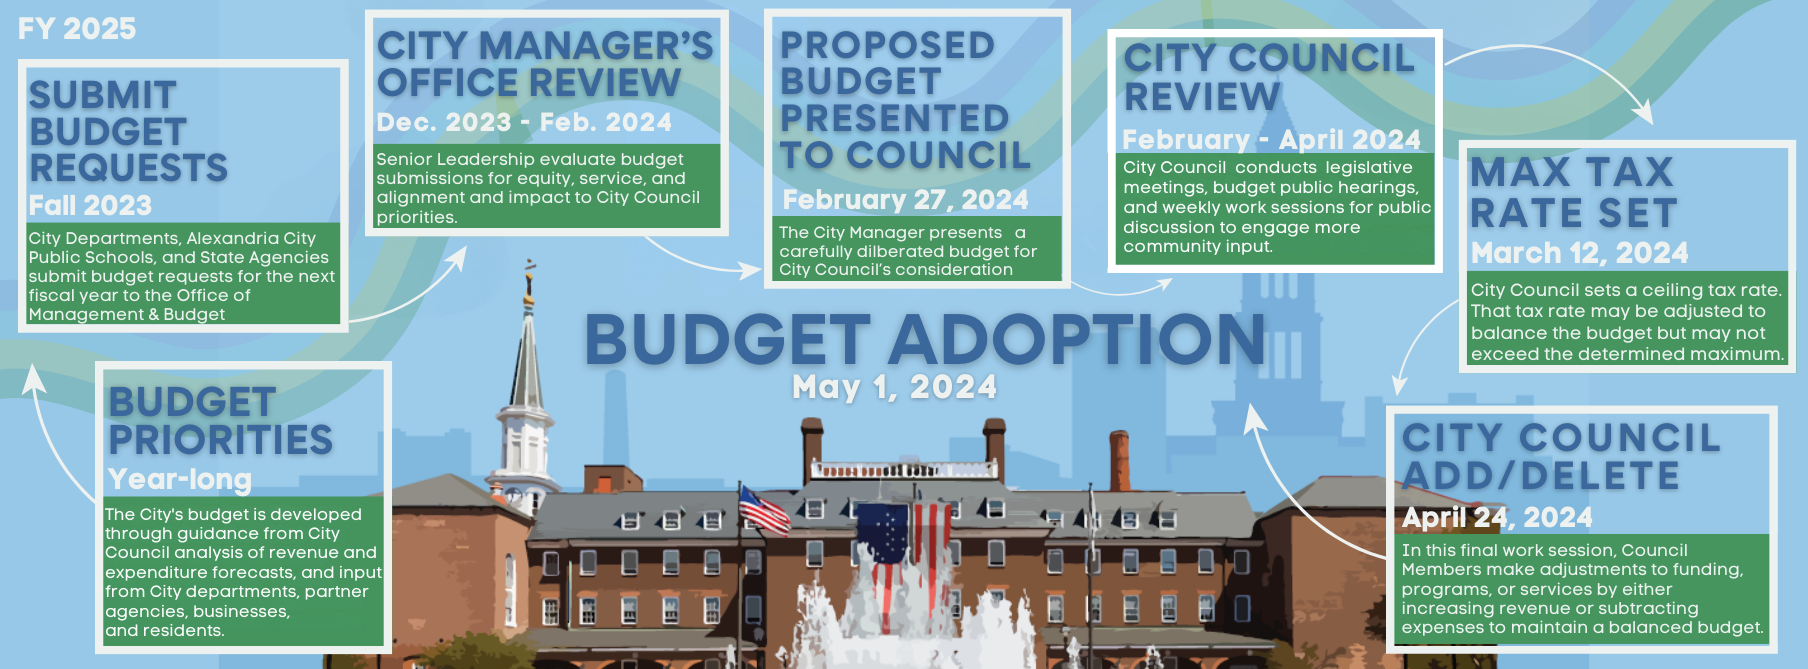 FY 2025 Budget Process Graphic